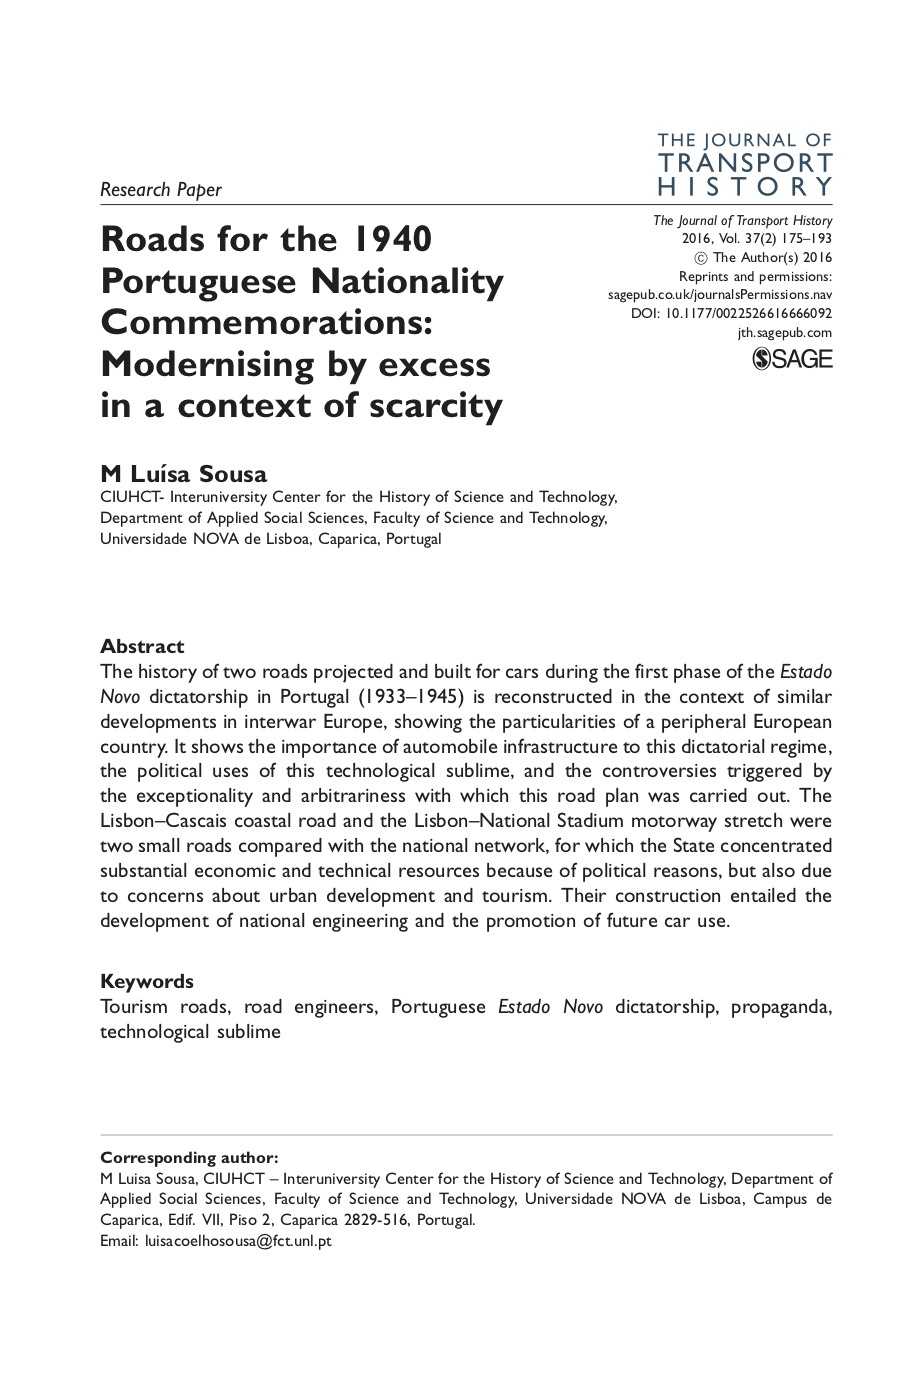 Roads for the 1940 Portuguese Nationality Commemorations: Modernising by excess in a context of scarcity, Capa